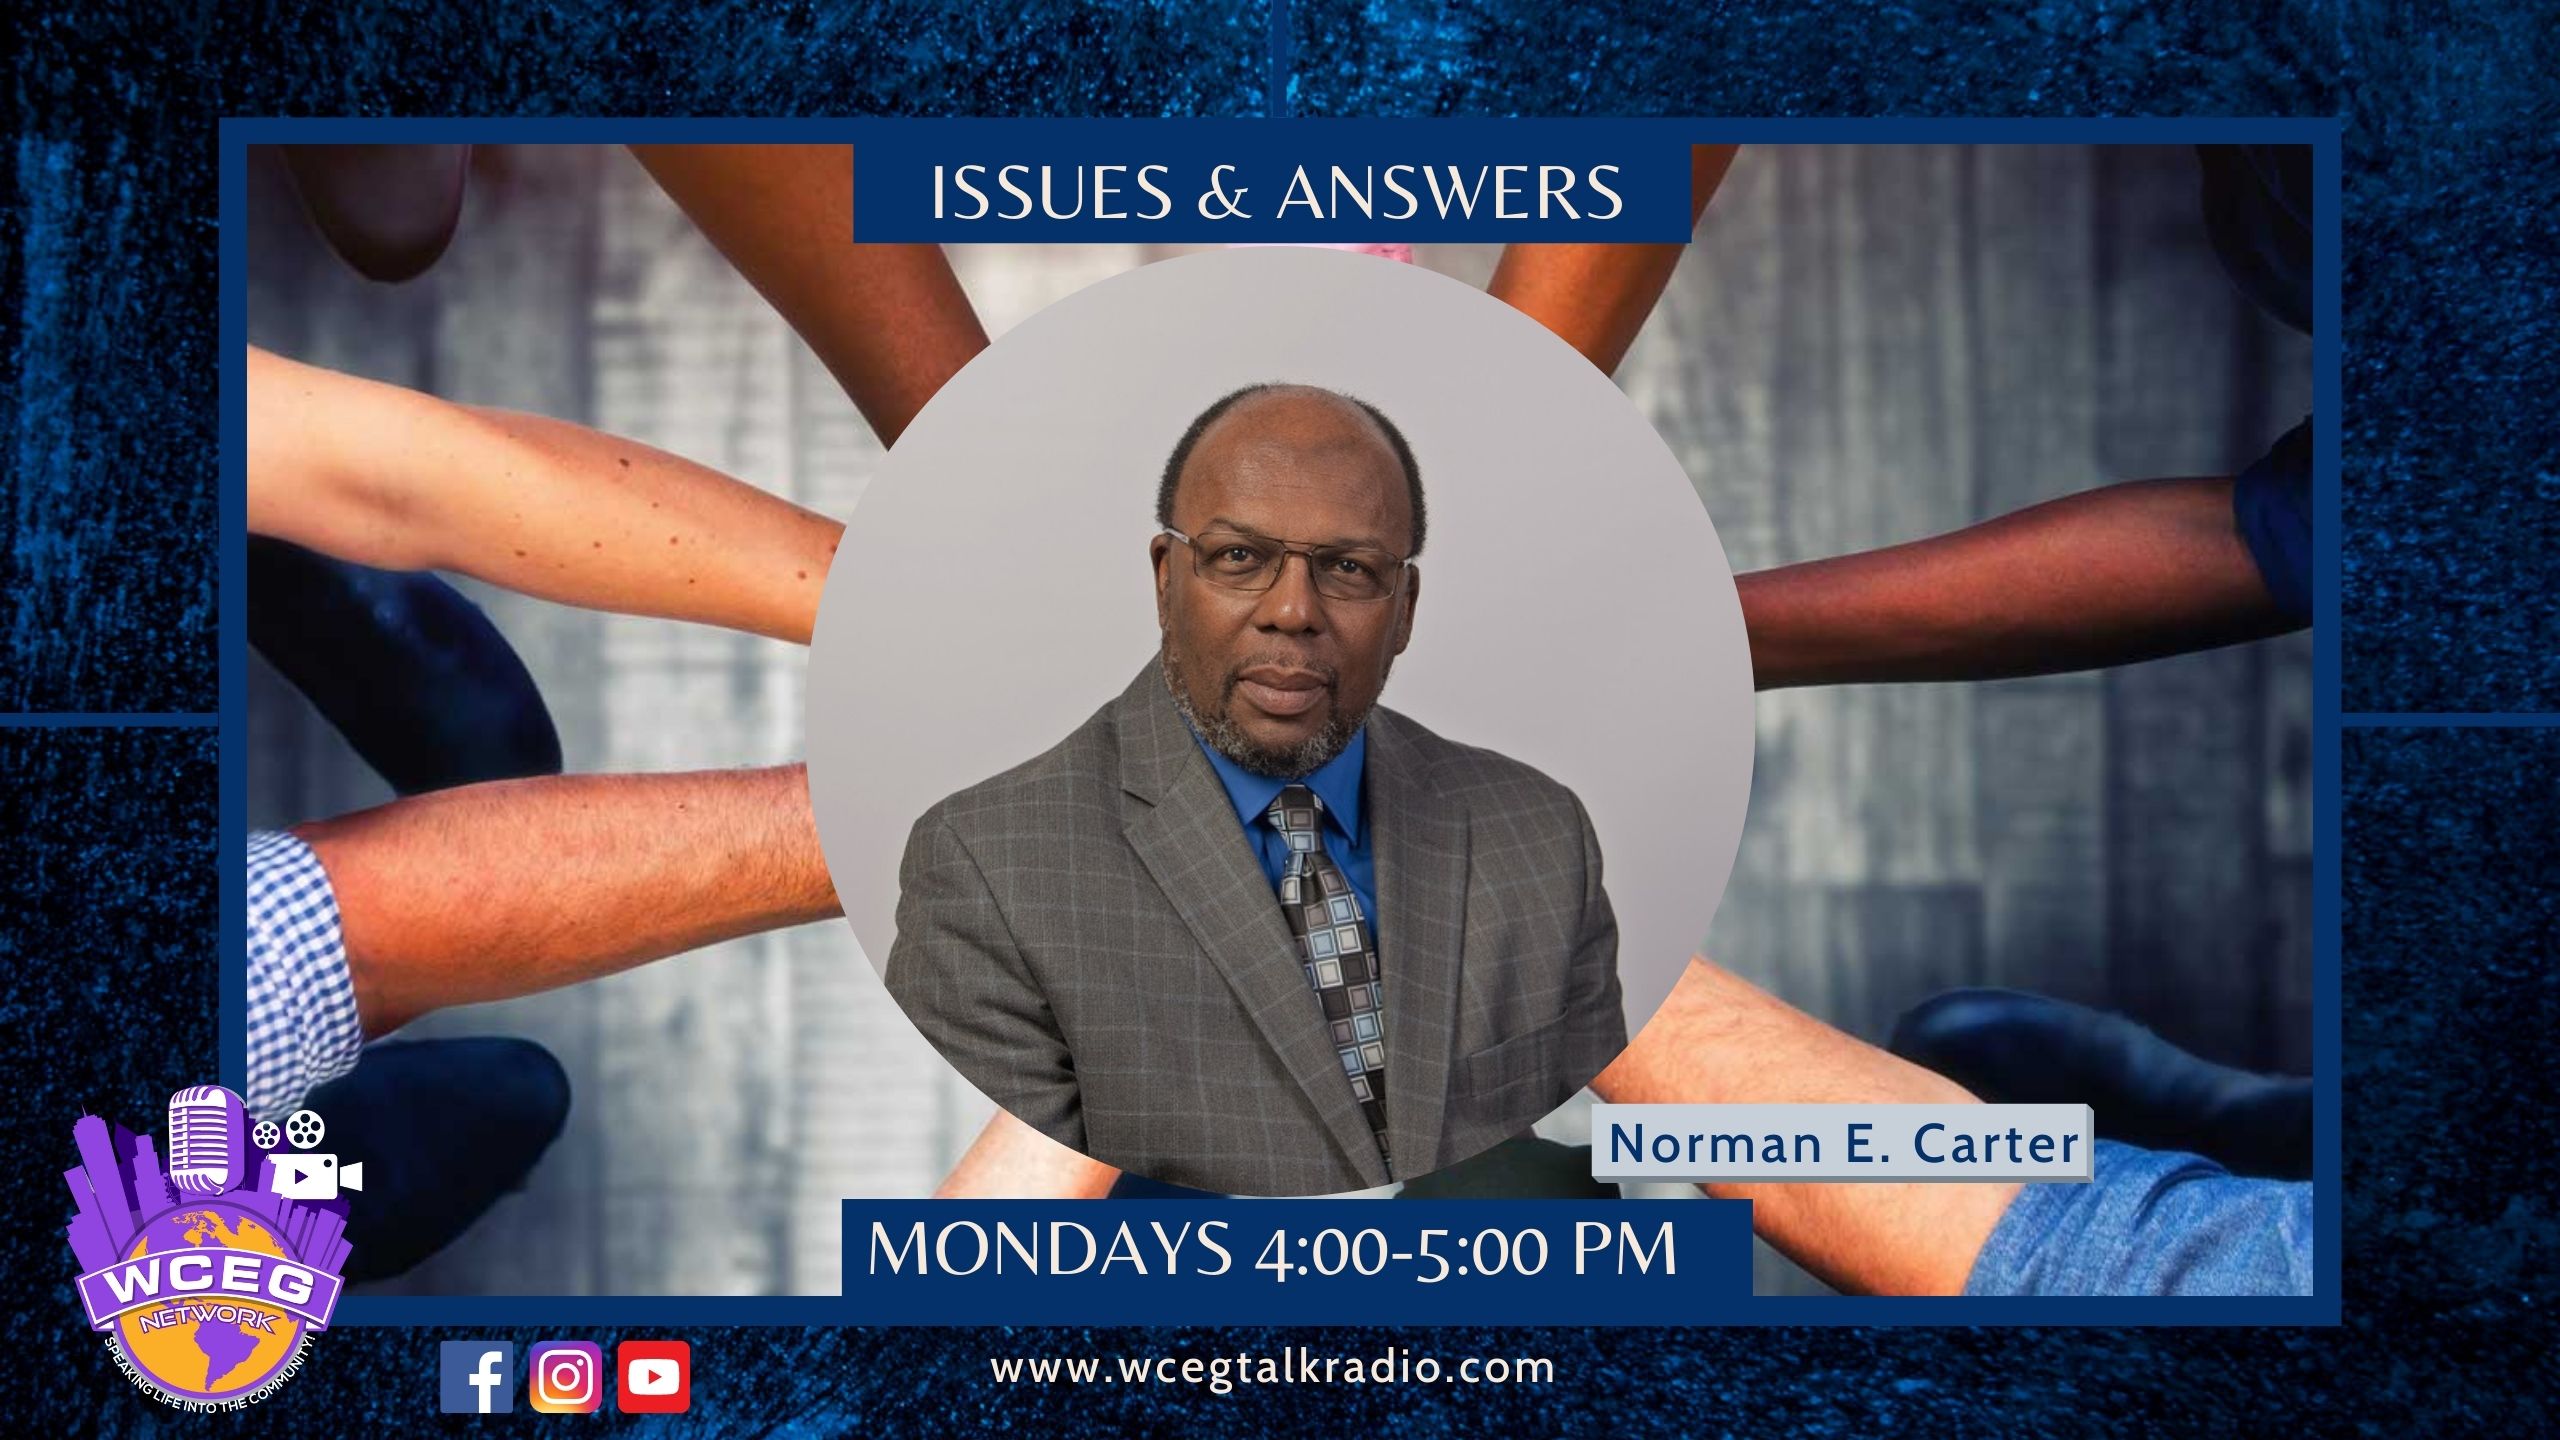 Issues & Answers with Norman Carter